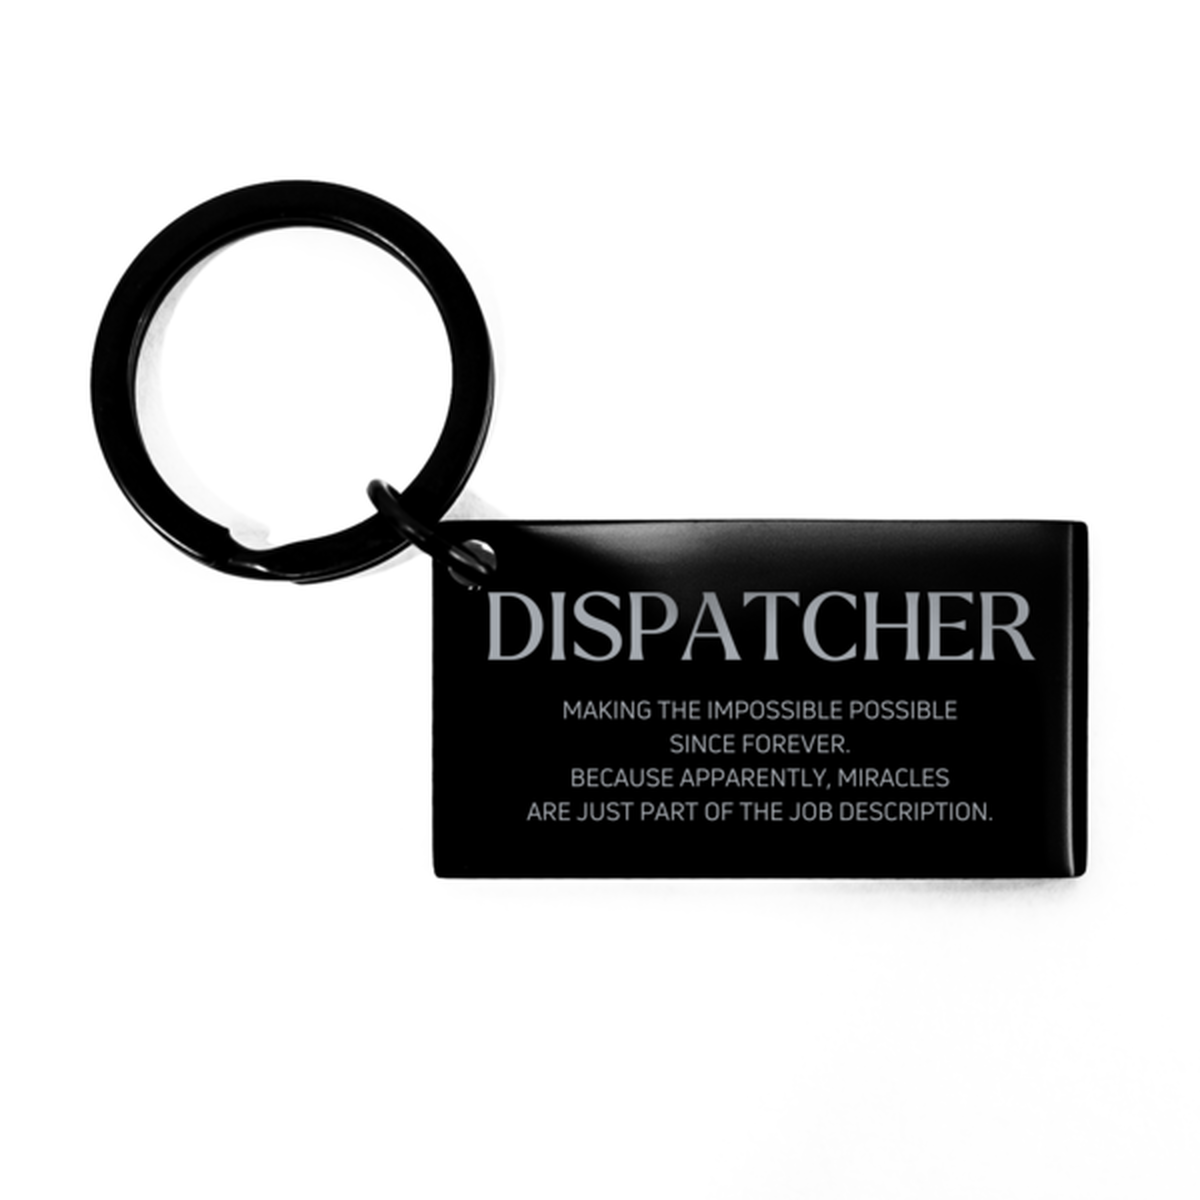 Funny Dispatcher Gifts, Miracles are just part of the job description, Inspirational Birthday Keychain For Dispatcher, Men, Women, Coworkers, Friends, Boss